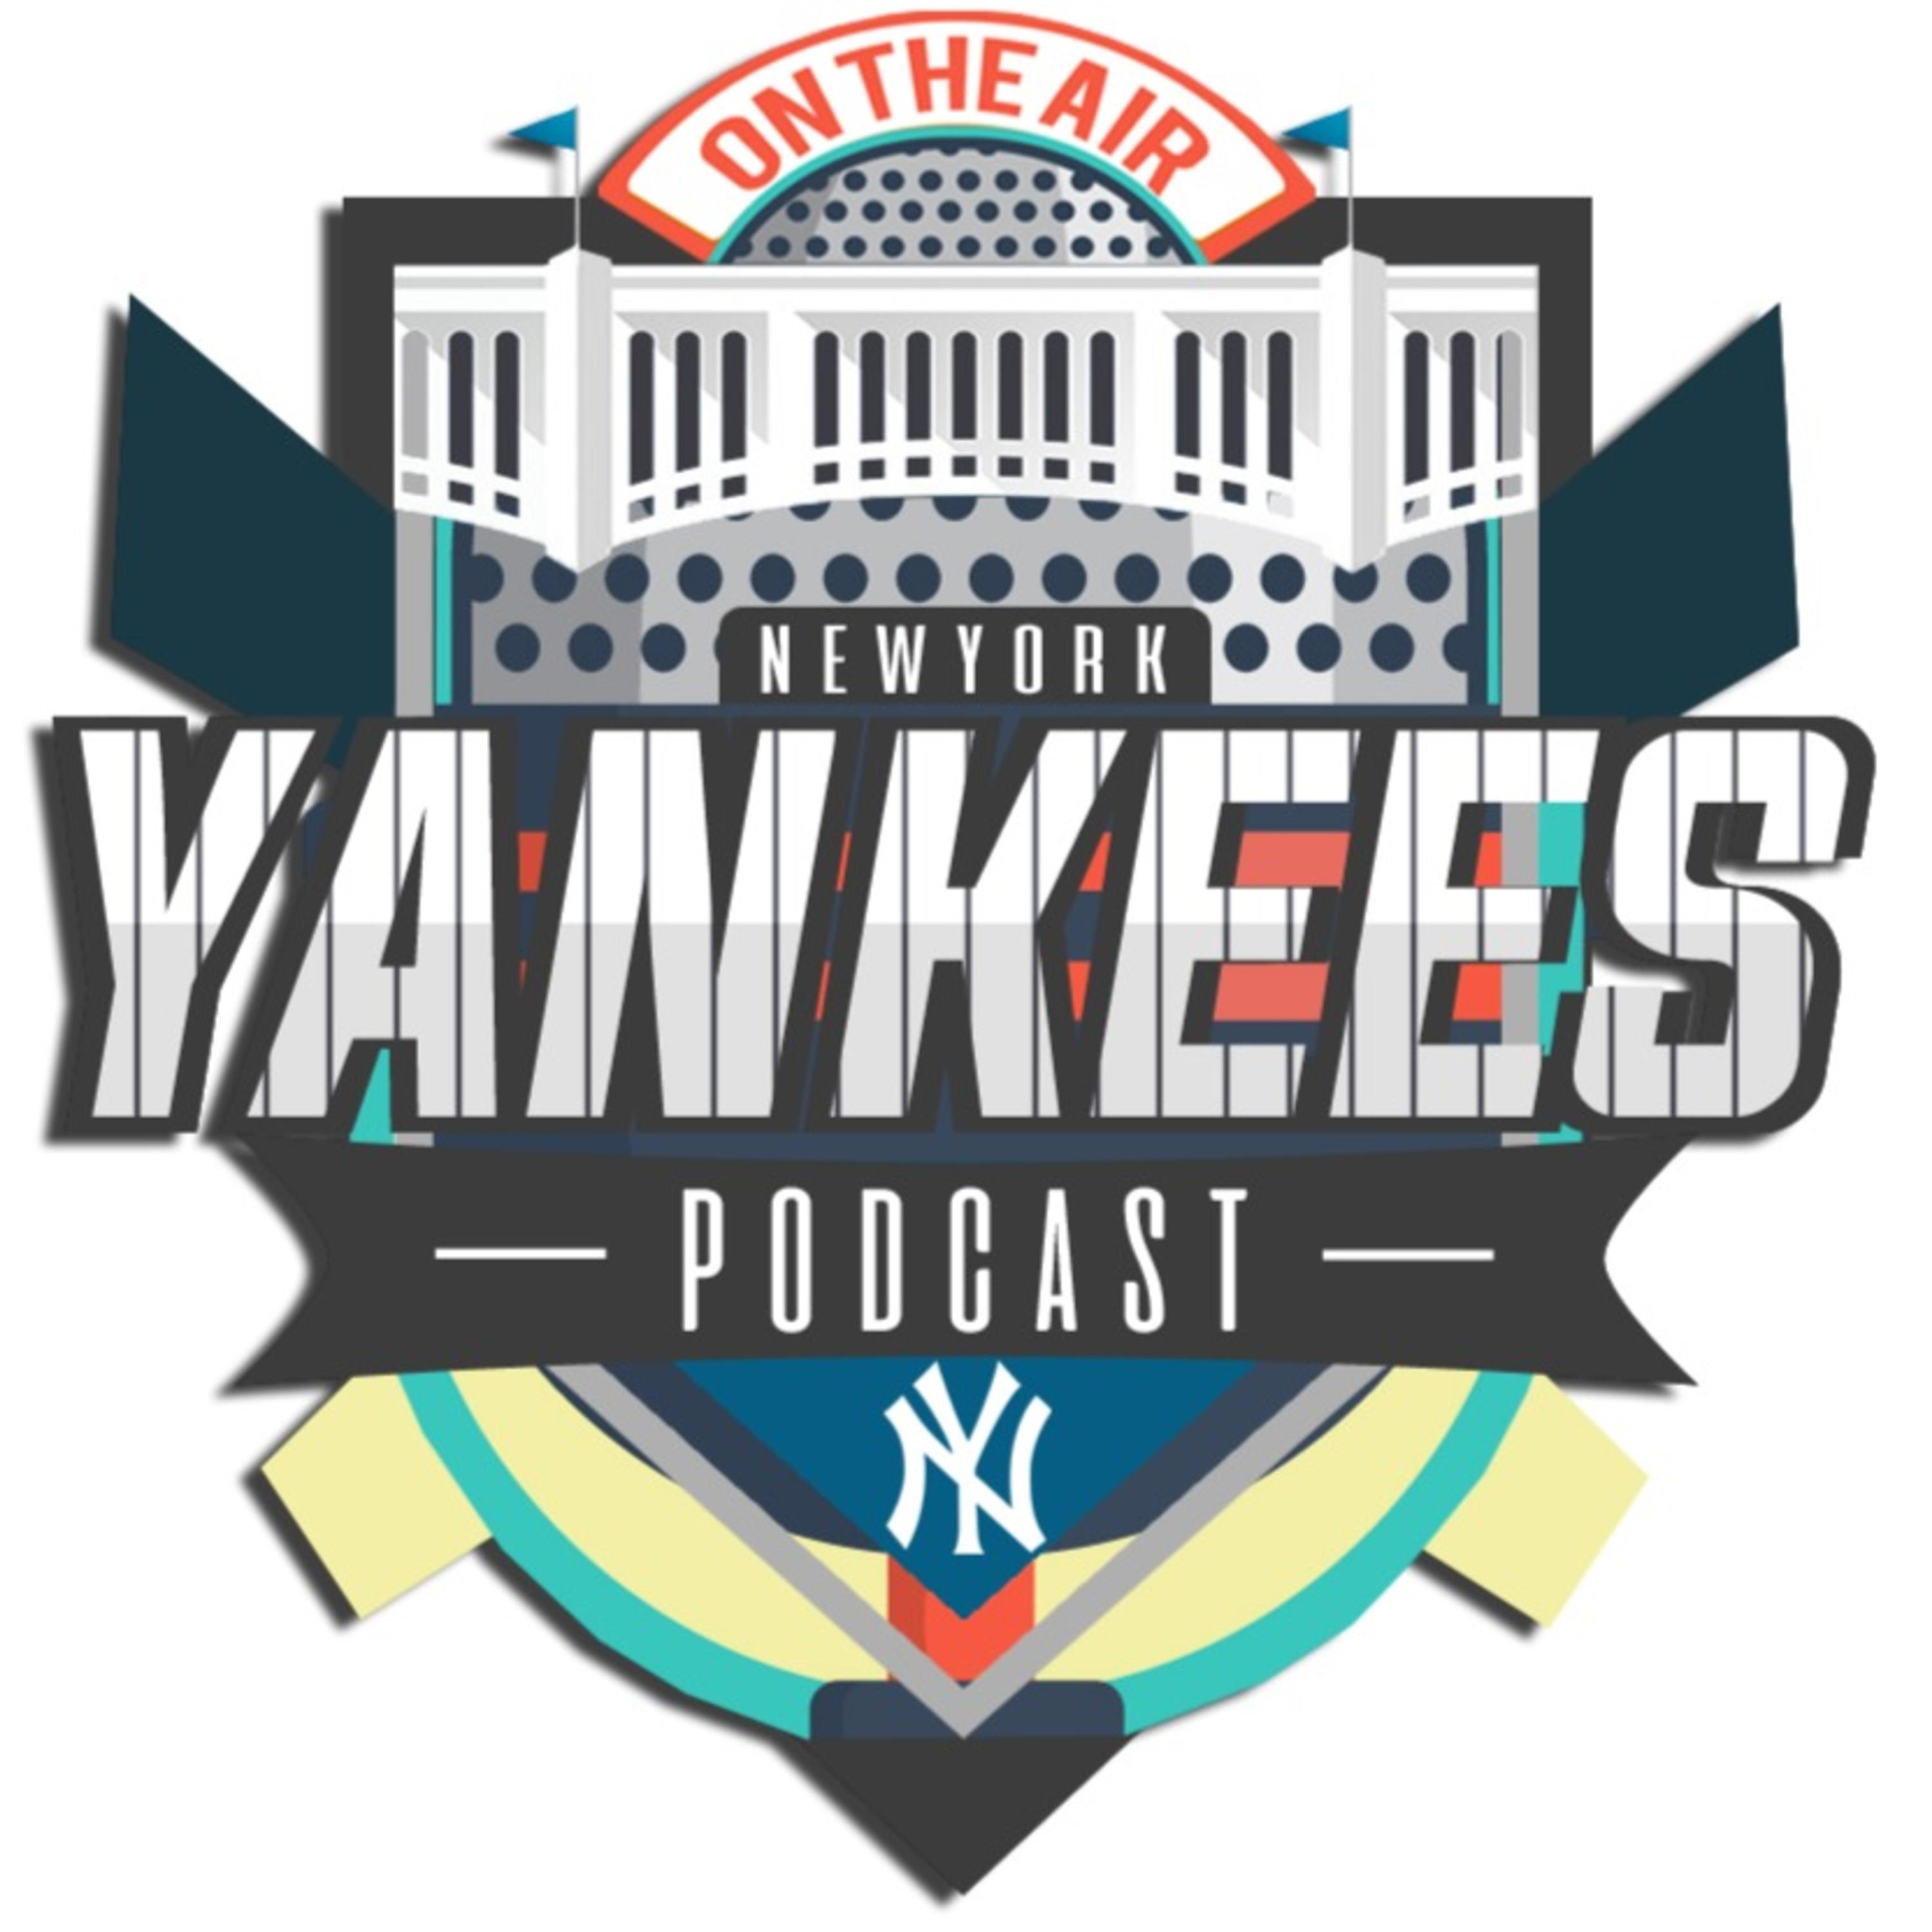 New York Yankees Hungary Podcast - Bé x DS! x Mike - S02EP24 - Yankees - Red Sox: The Rivalry - Episode 3